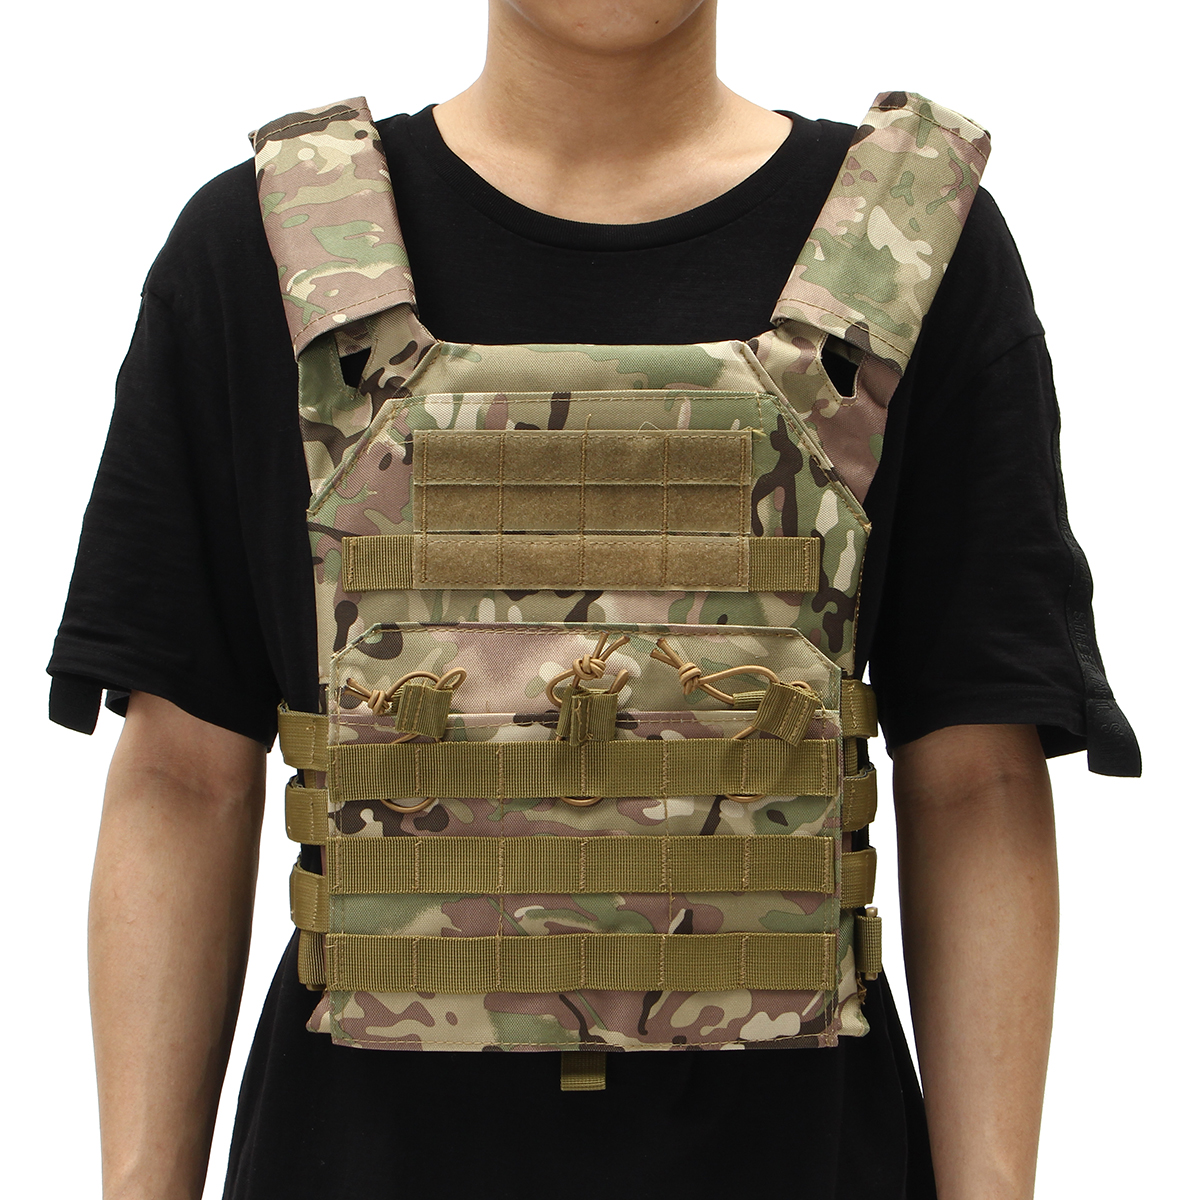 Outdoor-Molle-System-Tactical-Vest-Ultra-Light-Breathable-Adjustable-Armor-Plate-Vest-with-Pouches-1691276-8